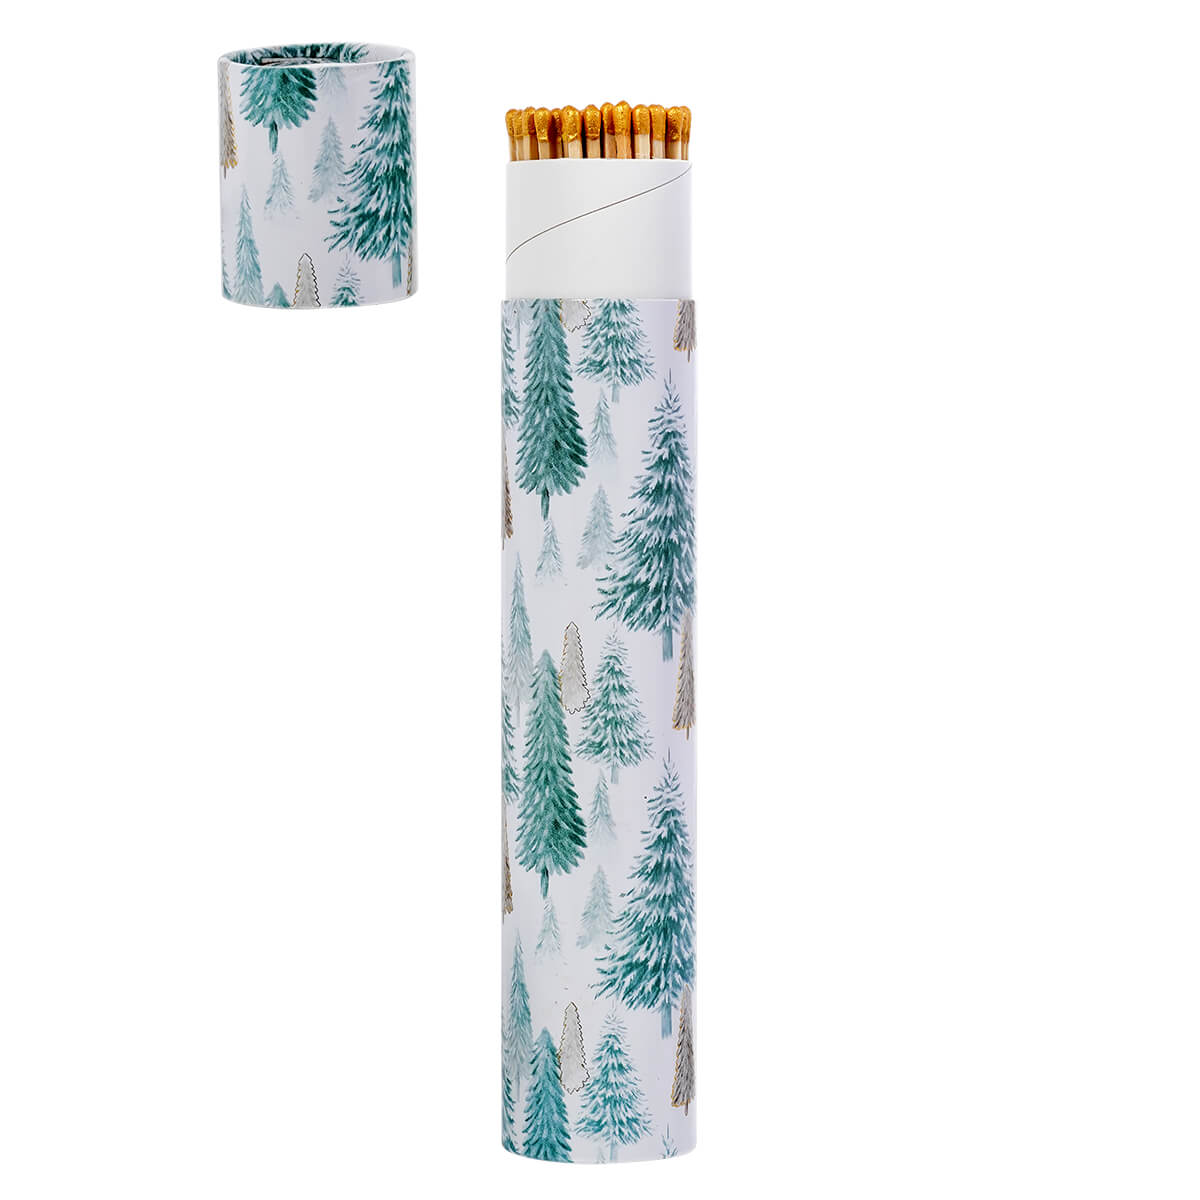 Fireplace Safety Matches in Tree Tube Matchbox